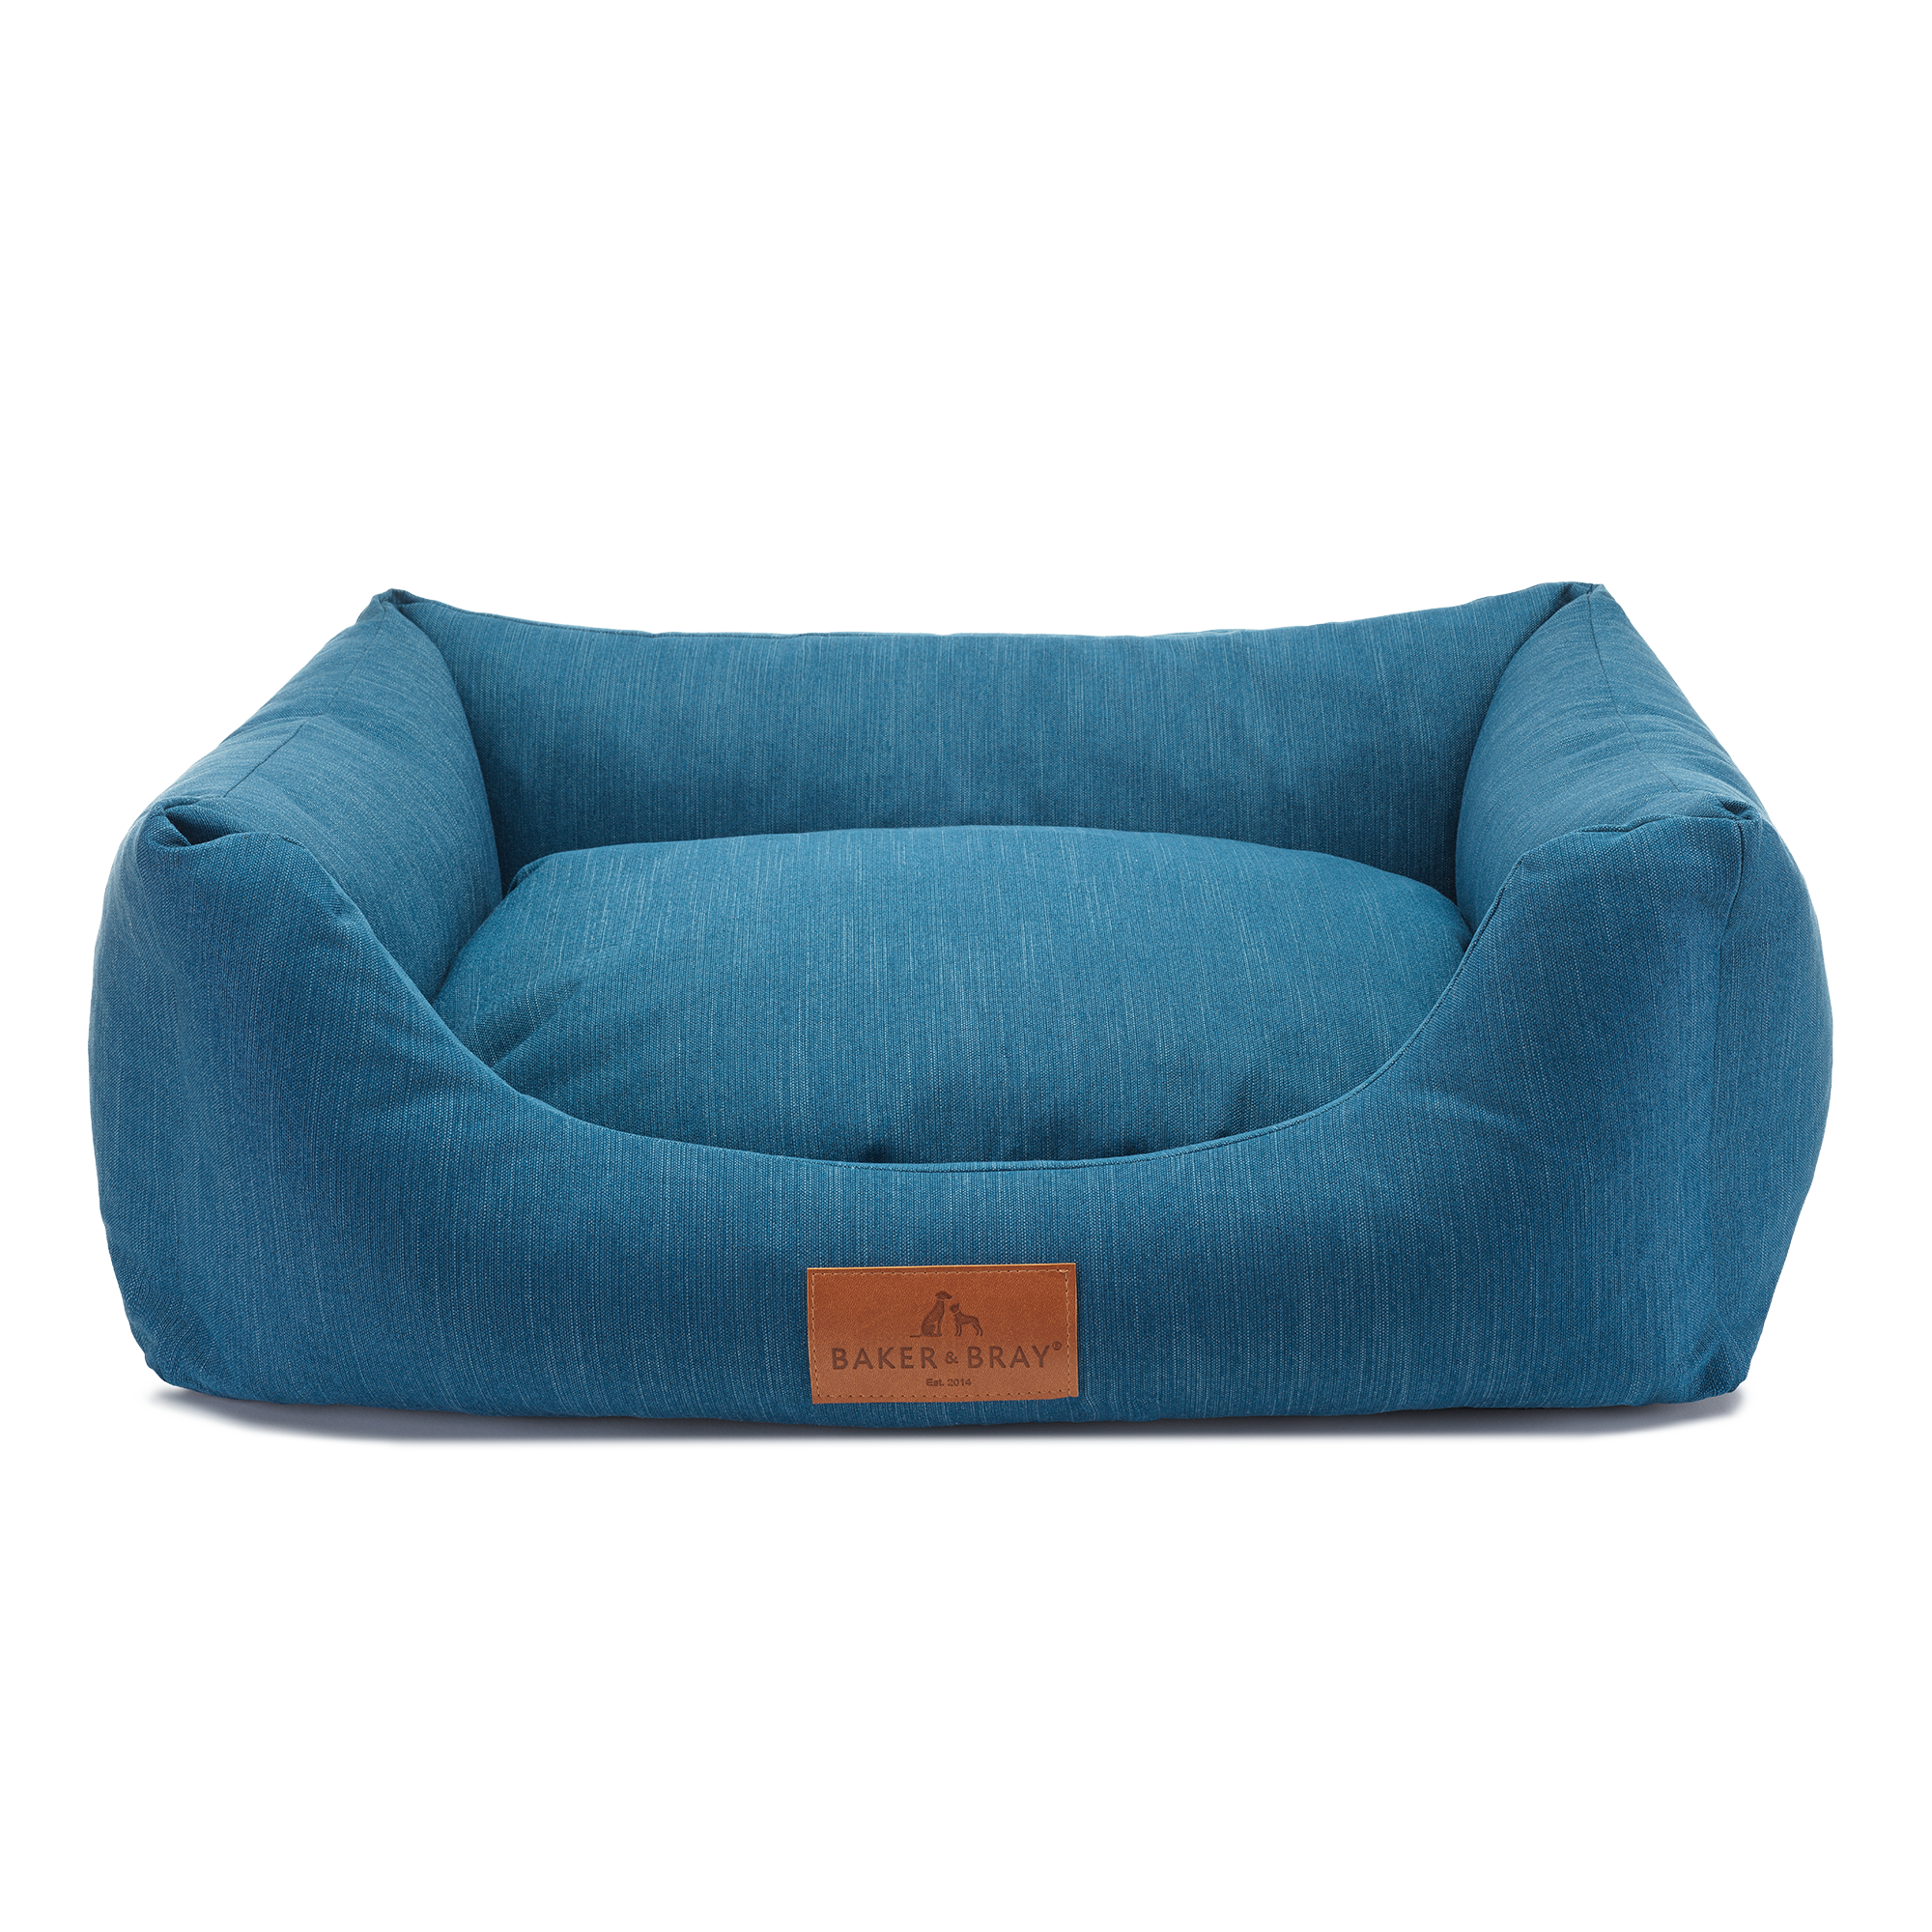 Eco Luxe Orthopaedic Luxury Dog Bed, Teal Blue-Green